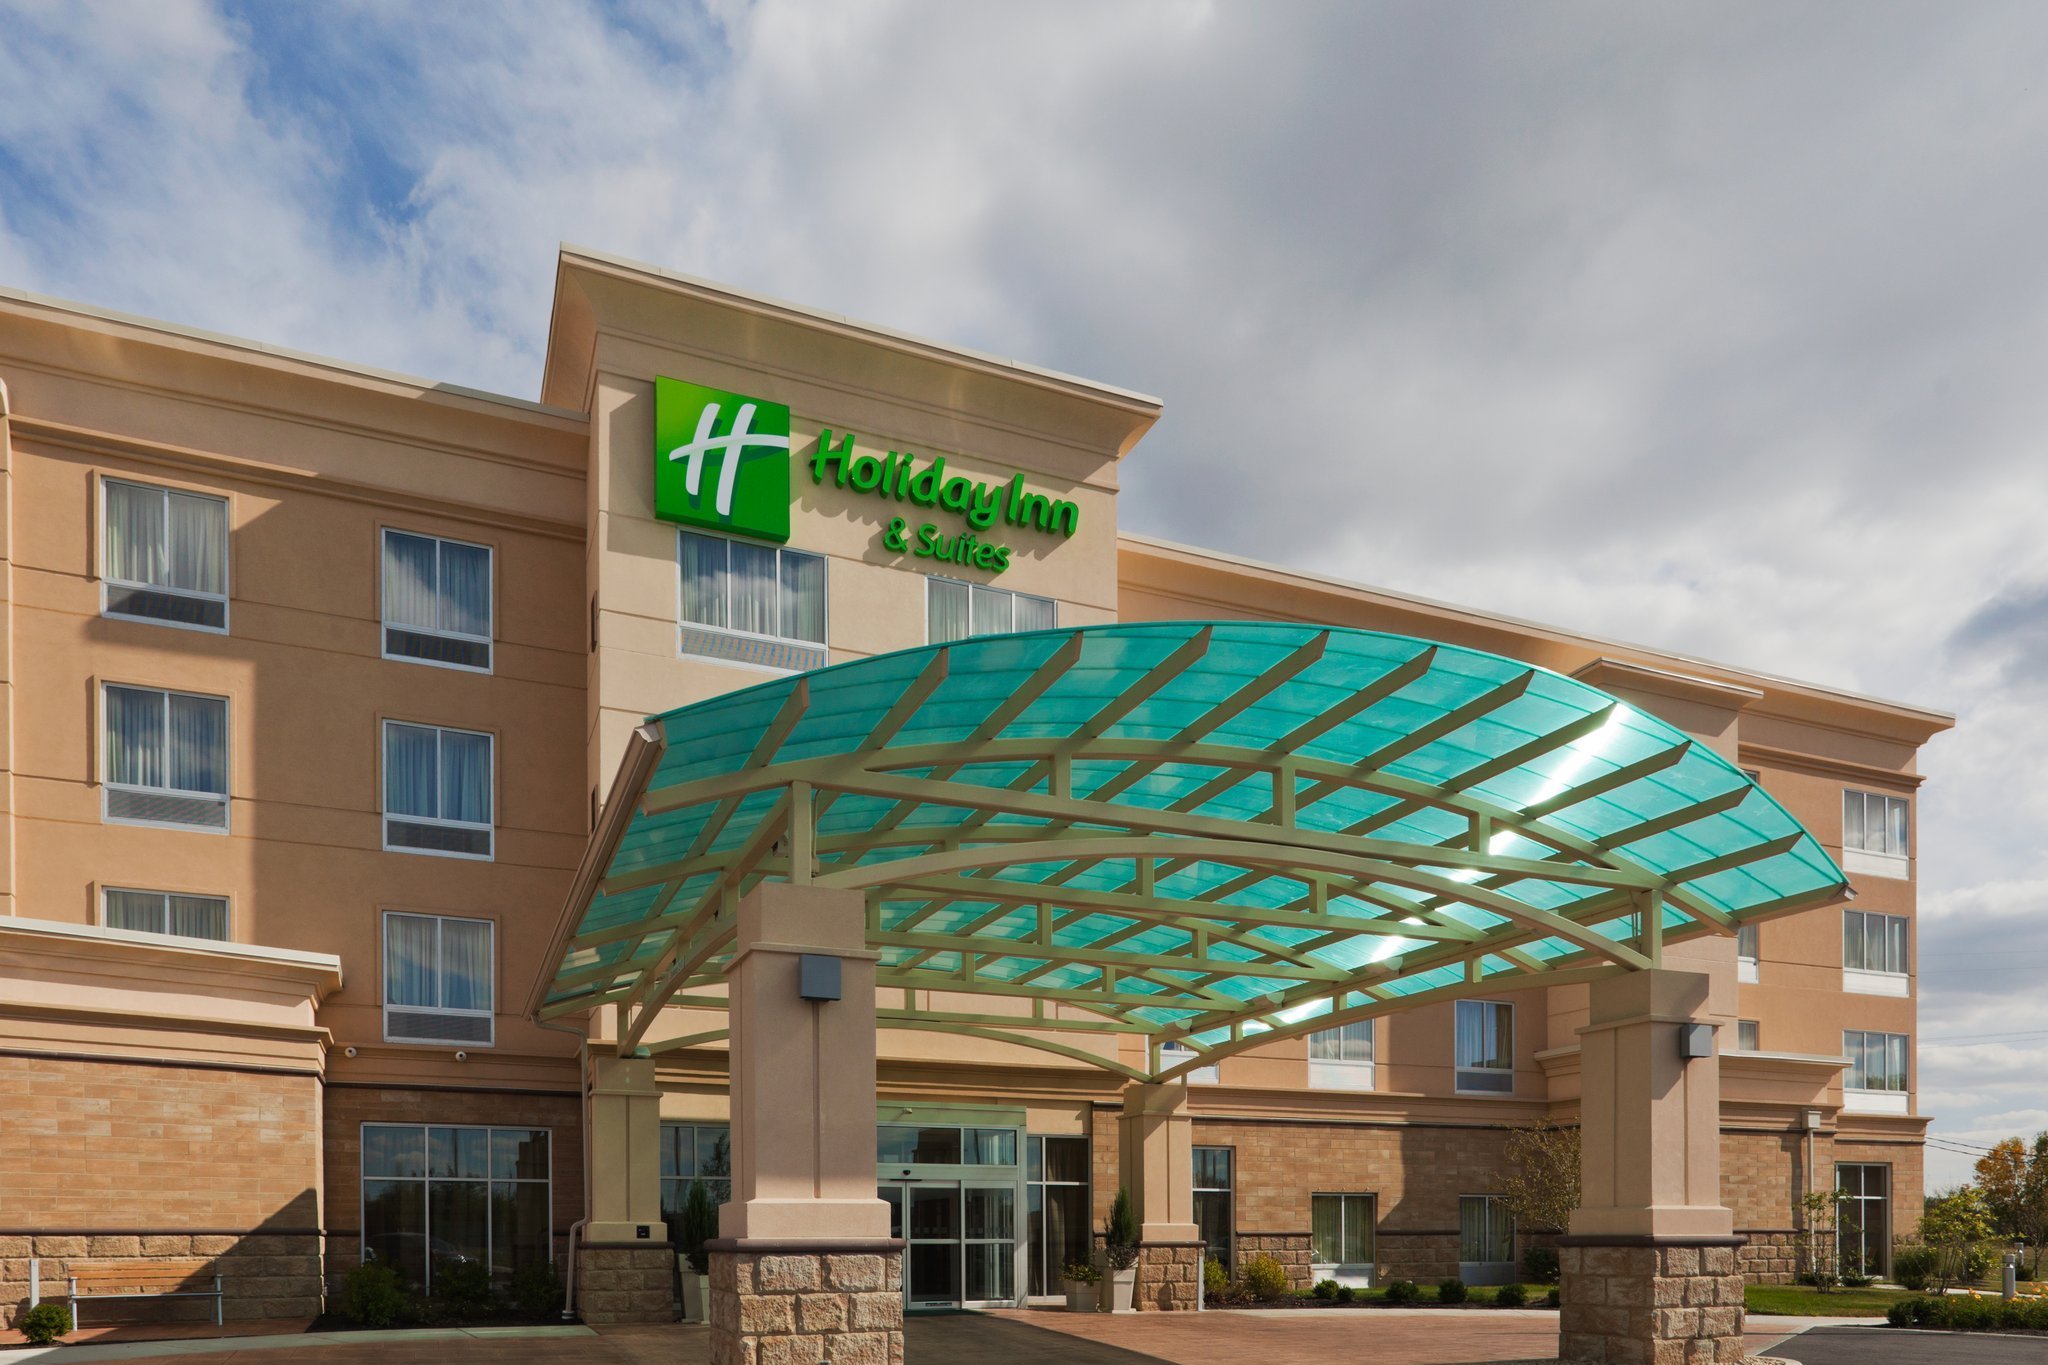 Photo of Holiday Inn Hotel & Suites Lima, Lima, OH